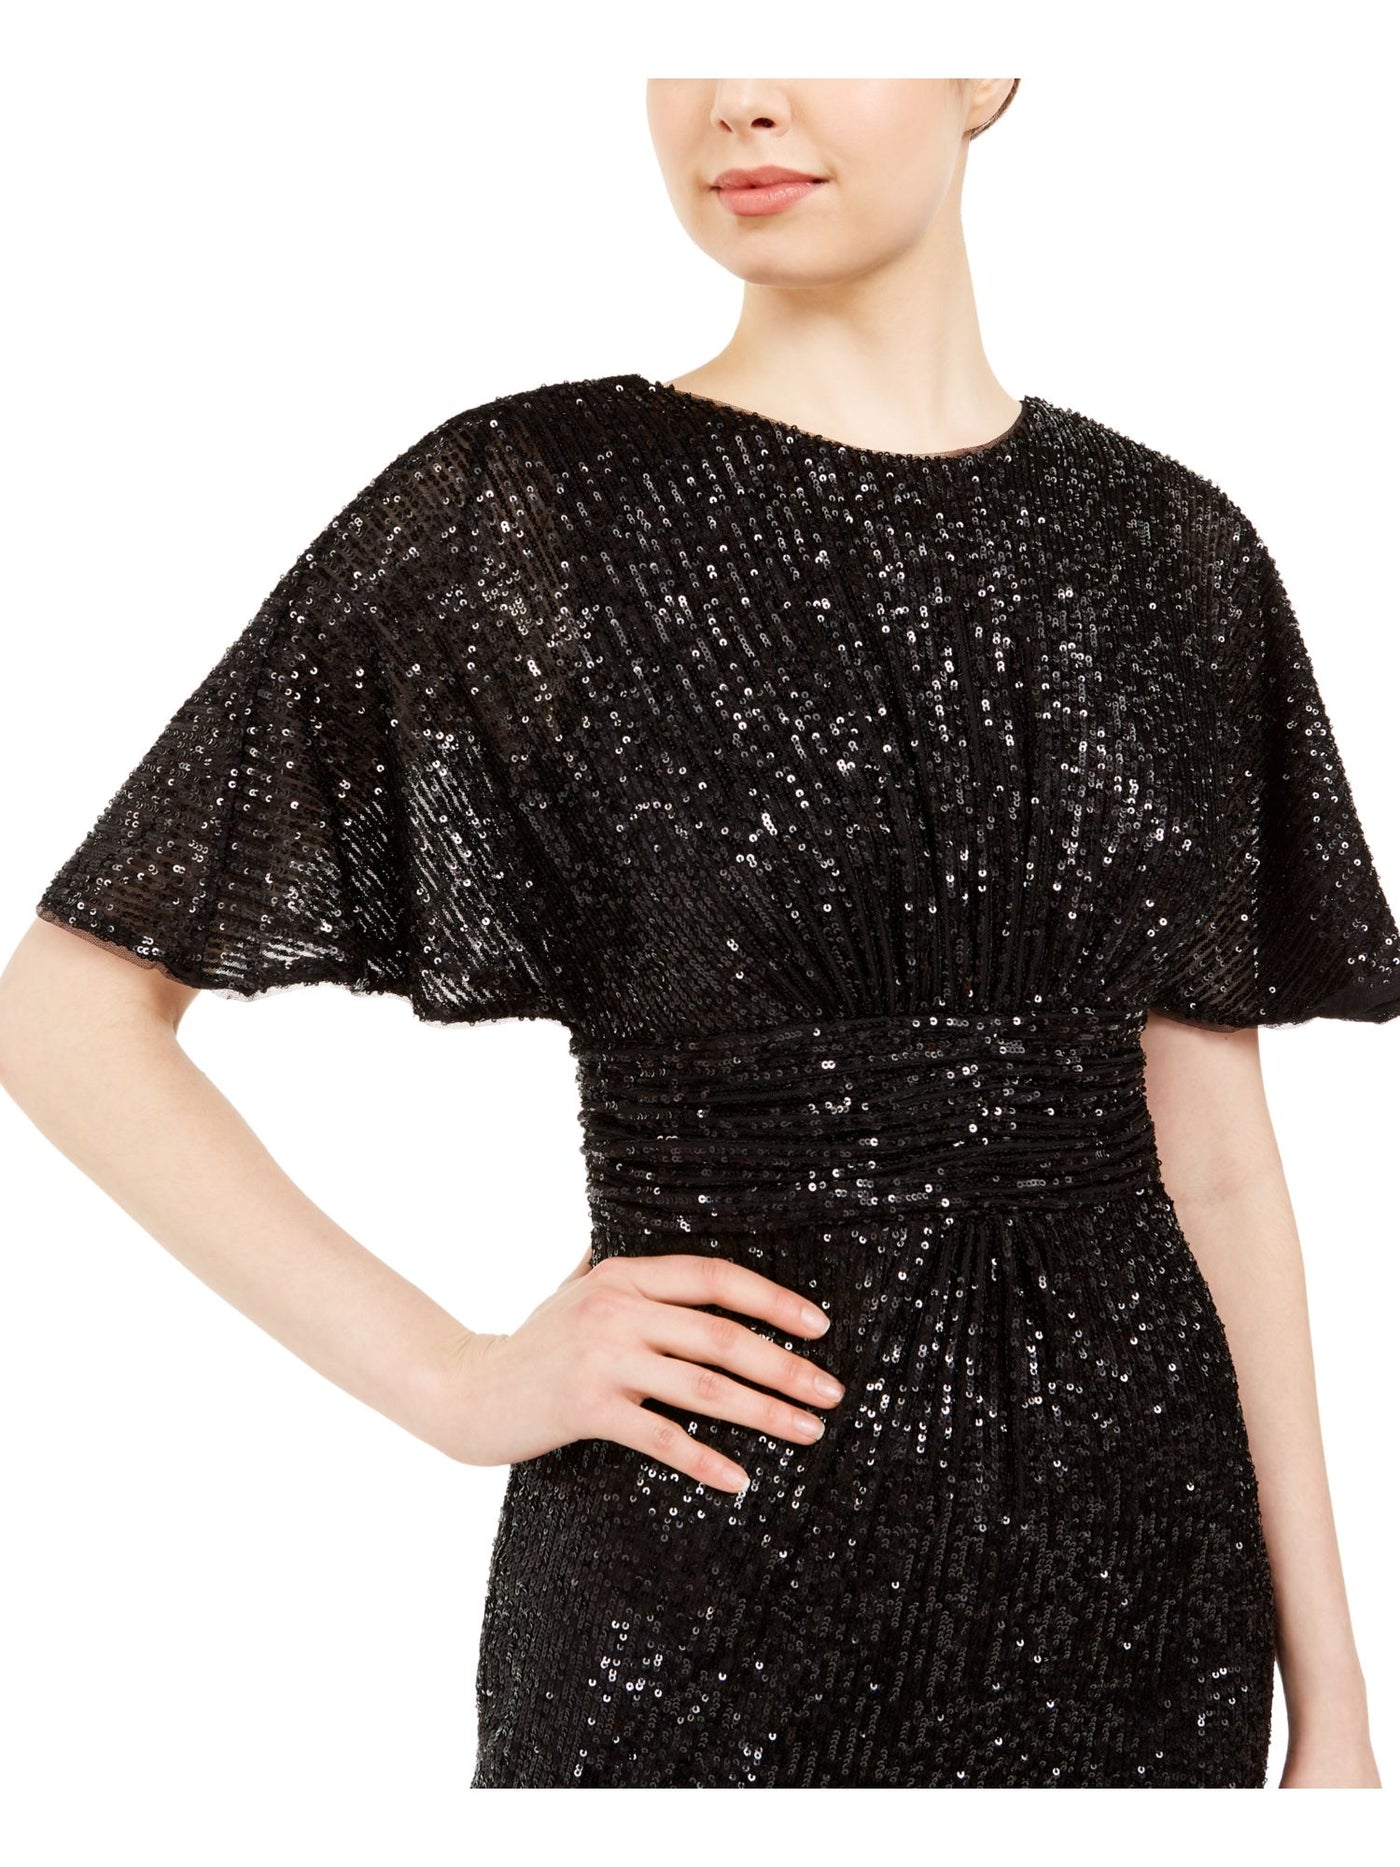 CALVIN KLEIN Womens Black Sequined Bell Sleeve Crew Neck Above The Knee Party Sheath Dress 4